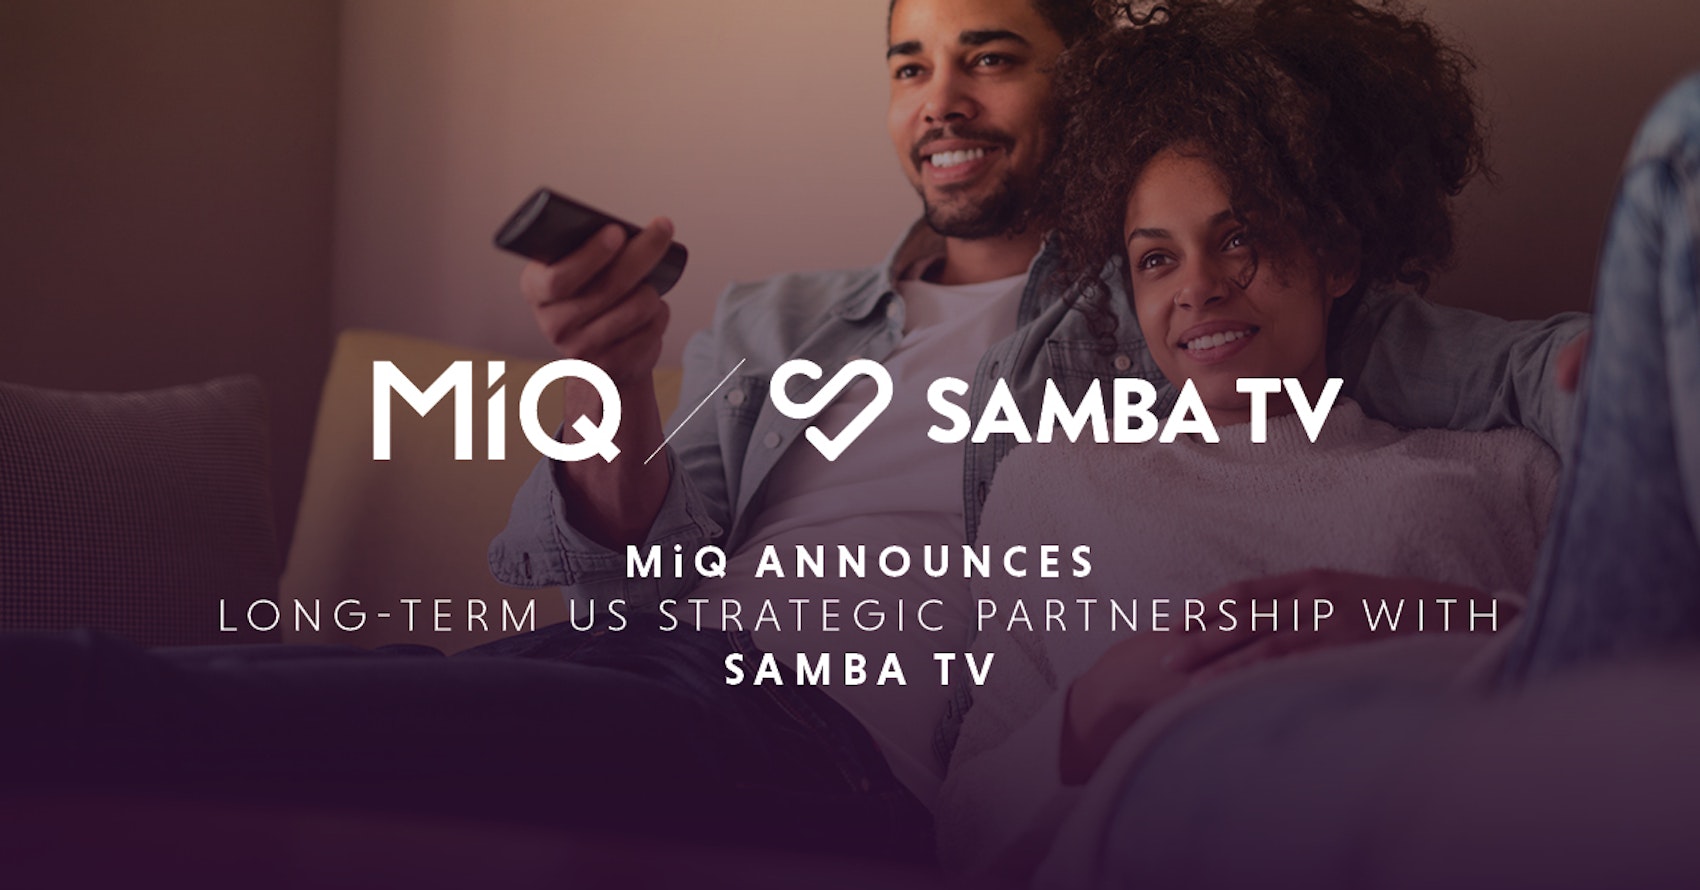 Samba TV and MiQ reach multi-year commercial agreement